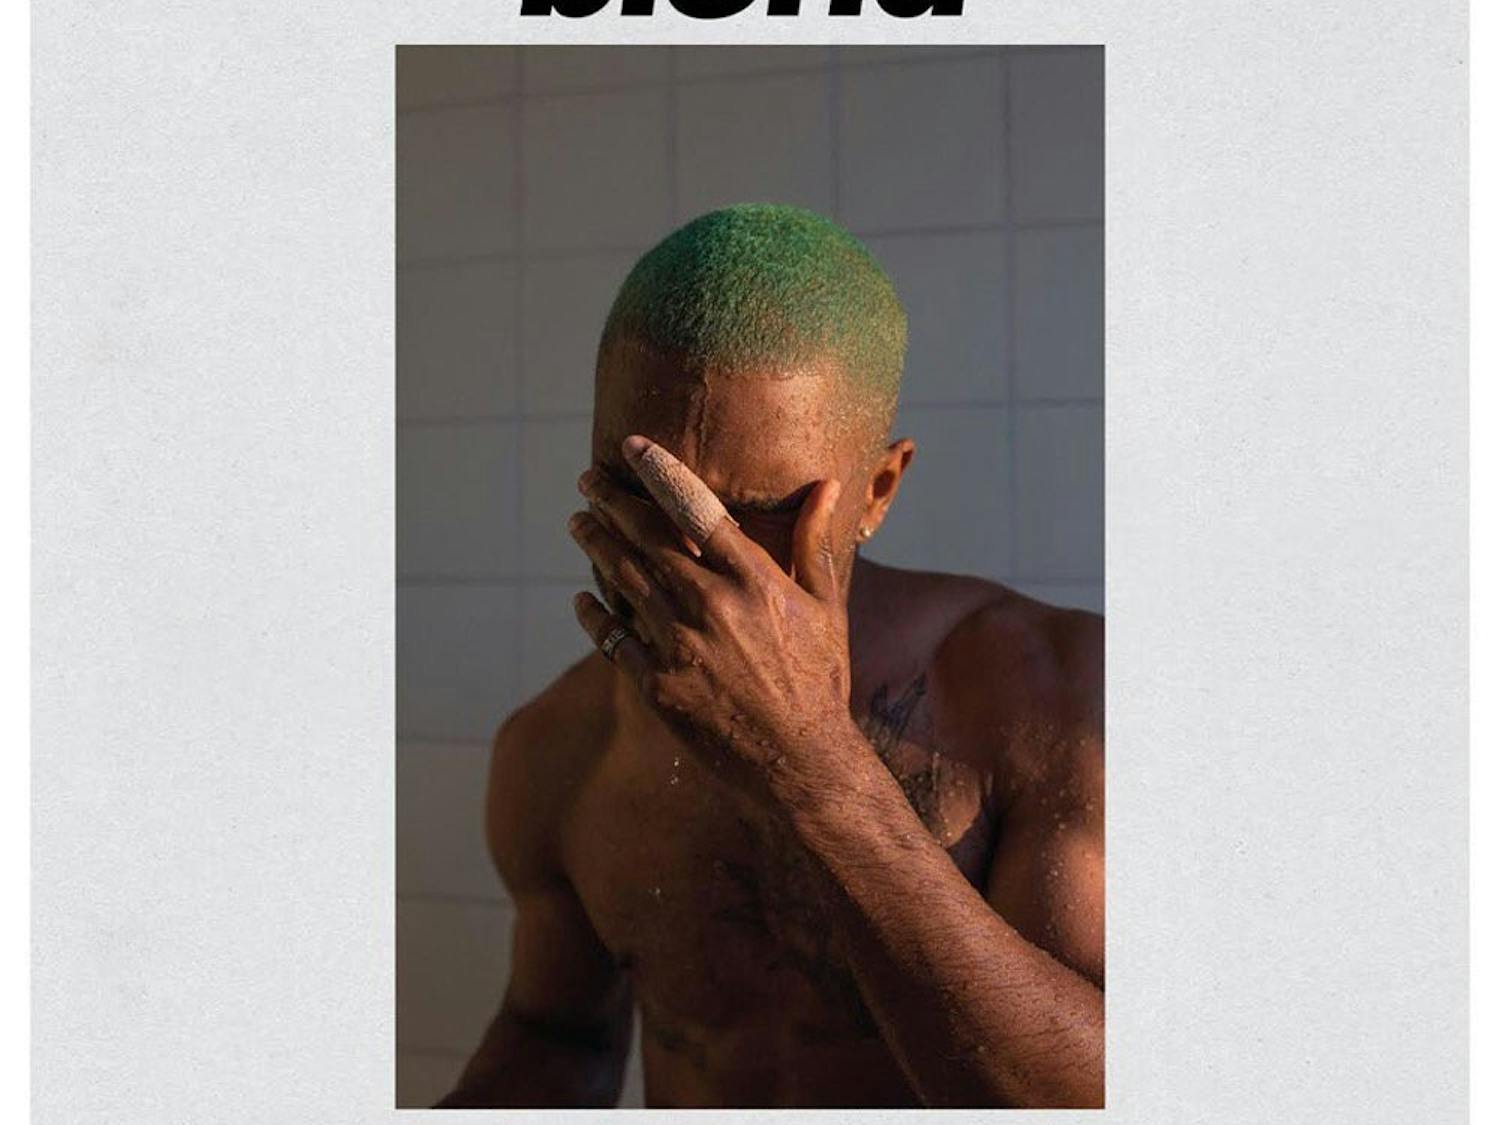 Frank Ocean's latest album Blond(e) was released on Aug. 21 and has already claimed the spot for #1 album.